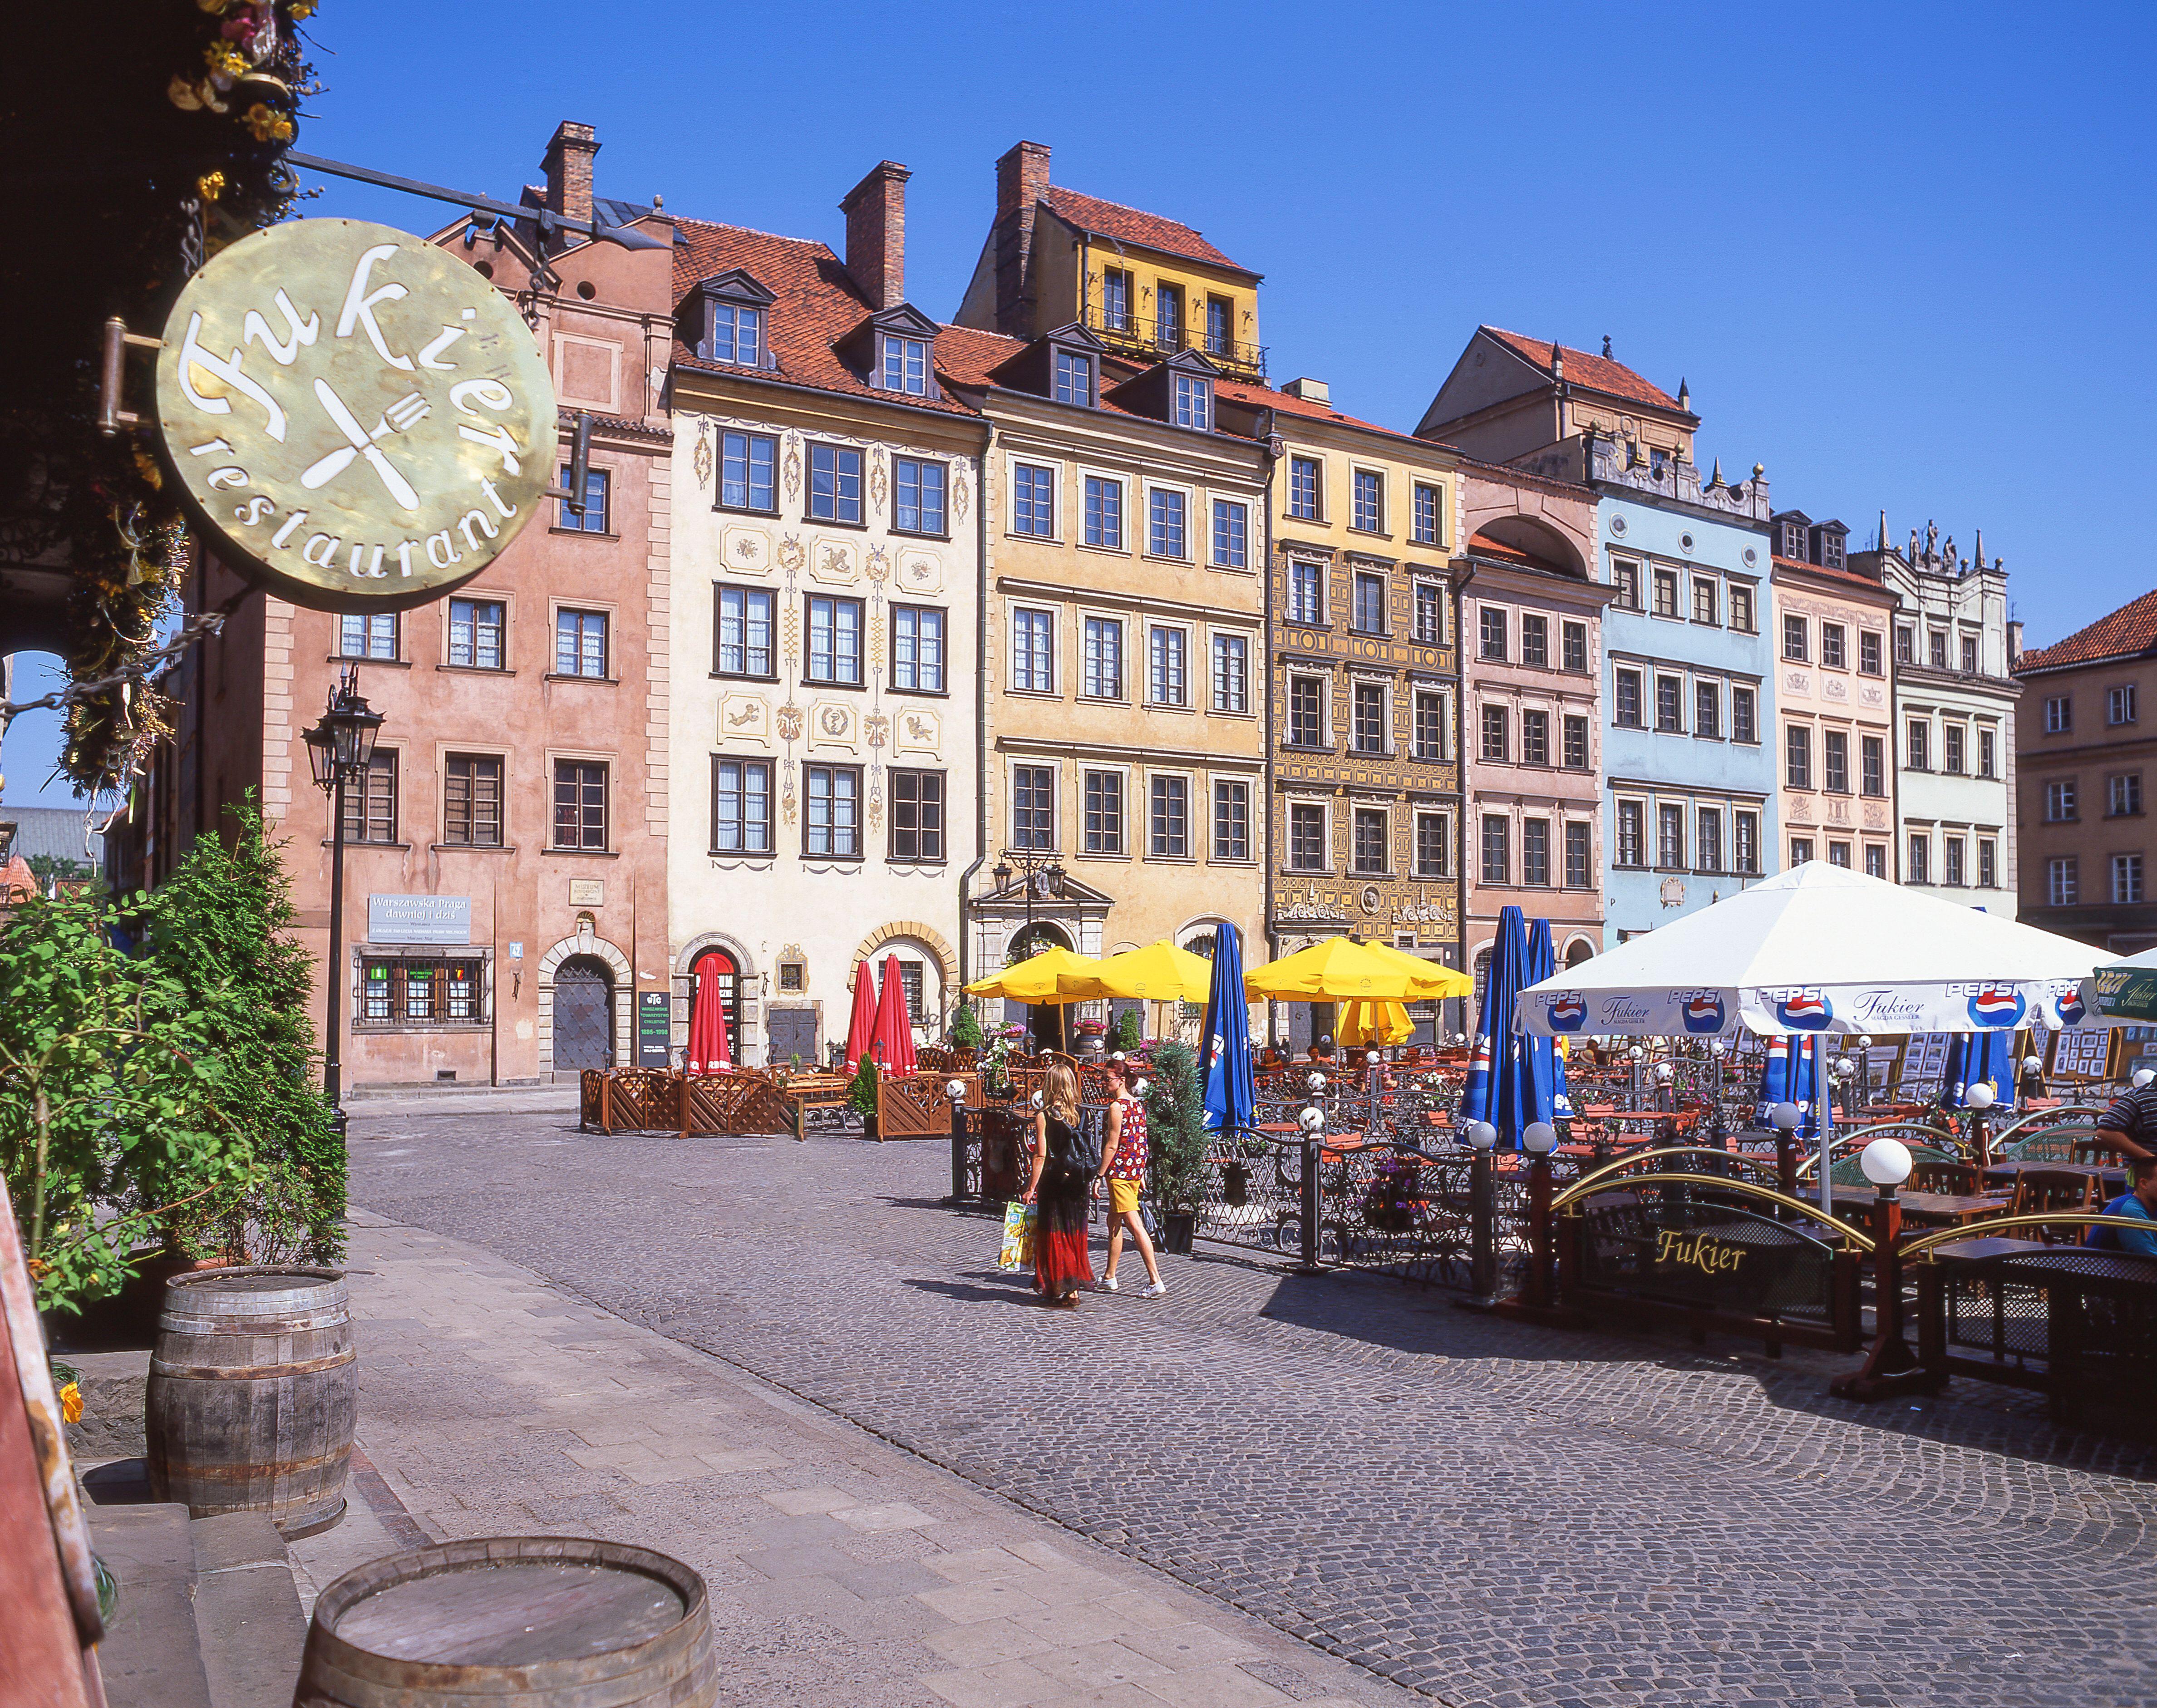 Old town market place, Warsaw